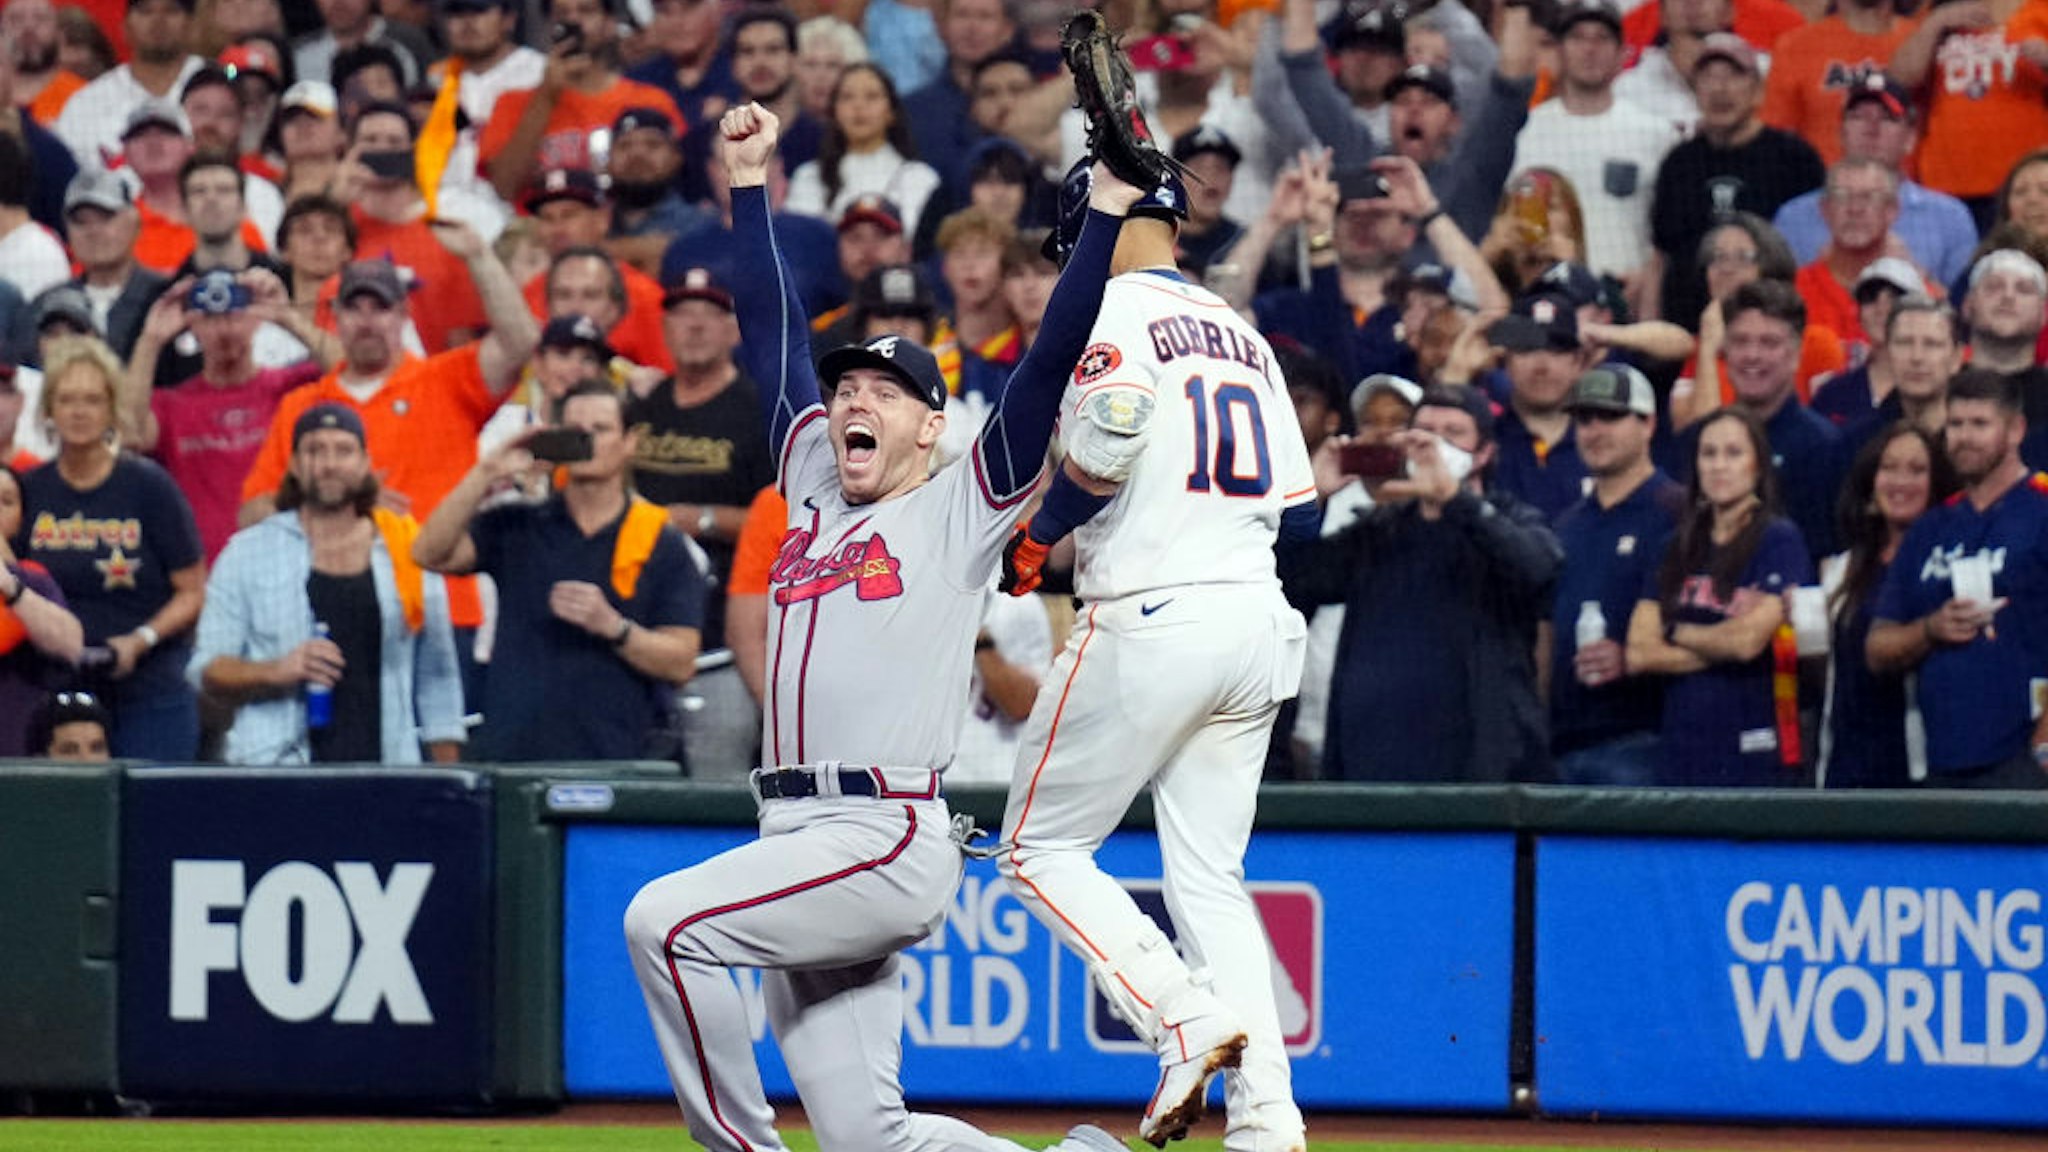 HOUSTON, TX - NOVEMBER 02: Freddie Freeman #5 of the Atlanta Braves celebrates after catching the final out to defeat the Houston Game 6 to clinch the 2021 World Series at Minute Maid Park on Tuesday, November 2, 2021 in Houston, Texas. (Photo by Daniel Shirey/MLB Photos via Getty Images)